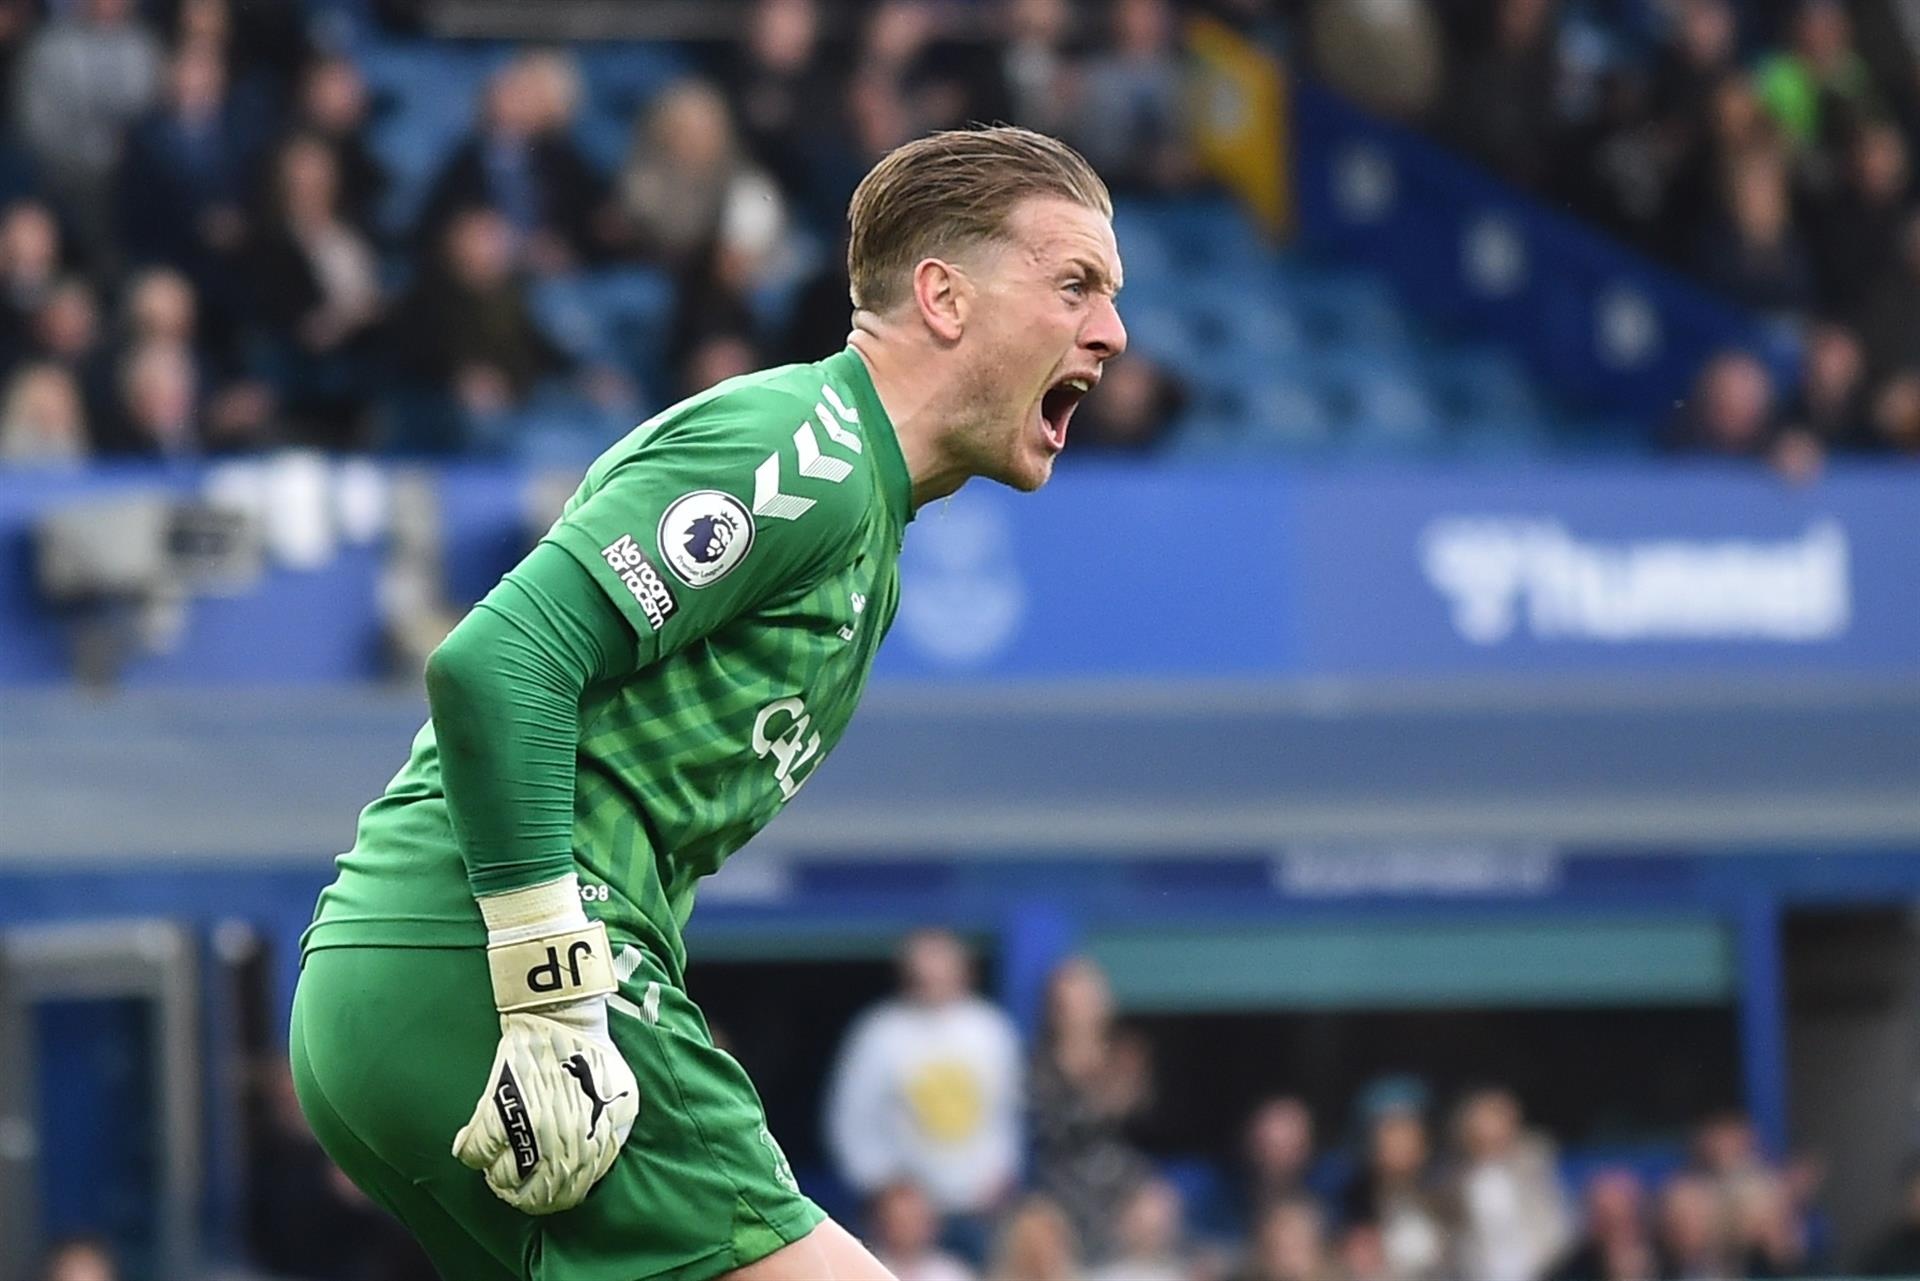 Superb Pickford and Alisson lead Merseyside derby to goalless draw